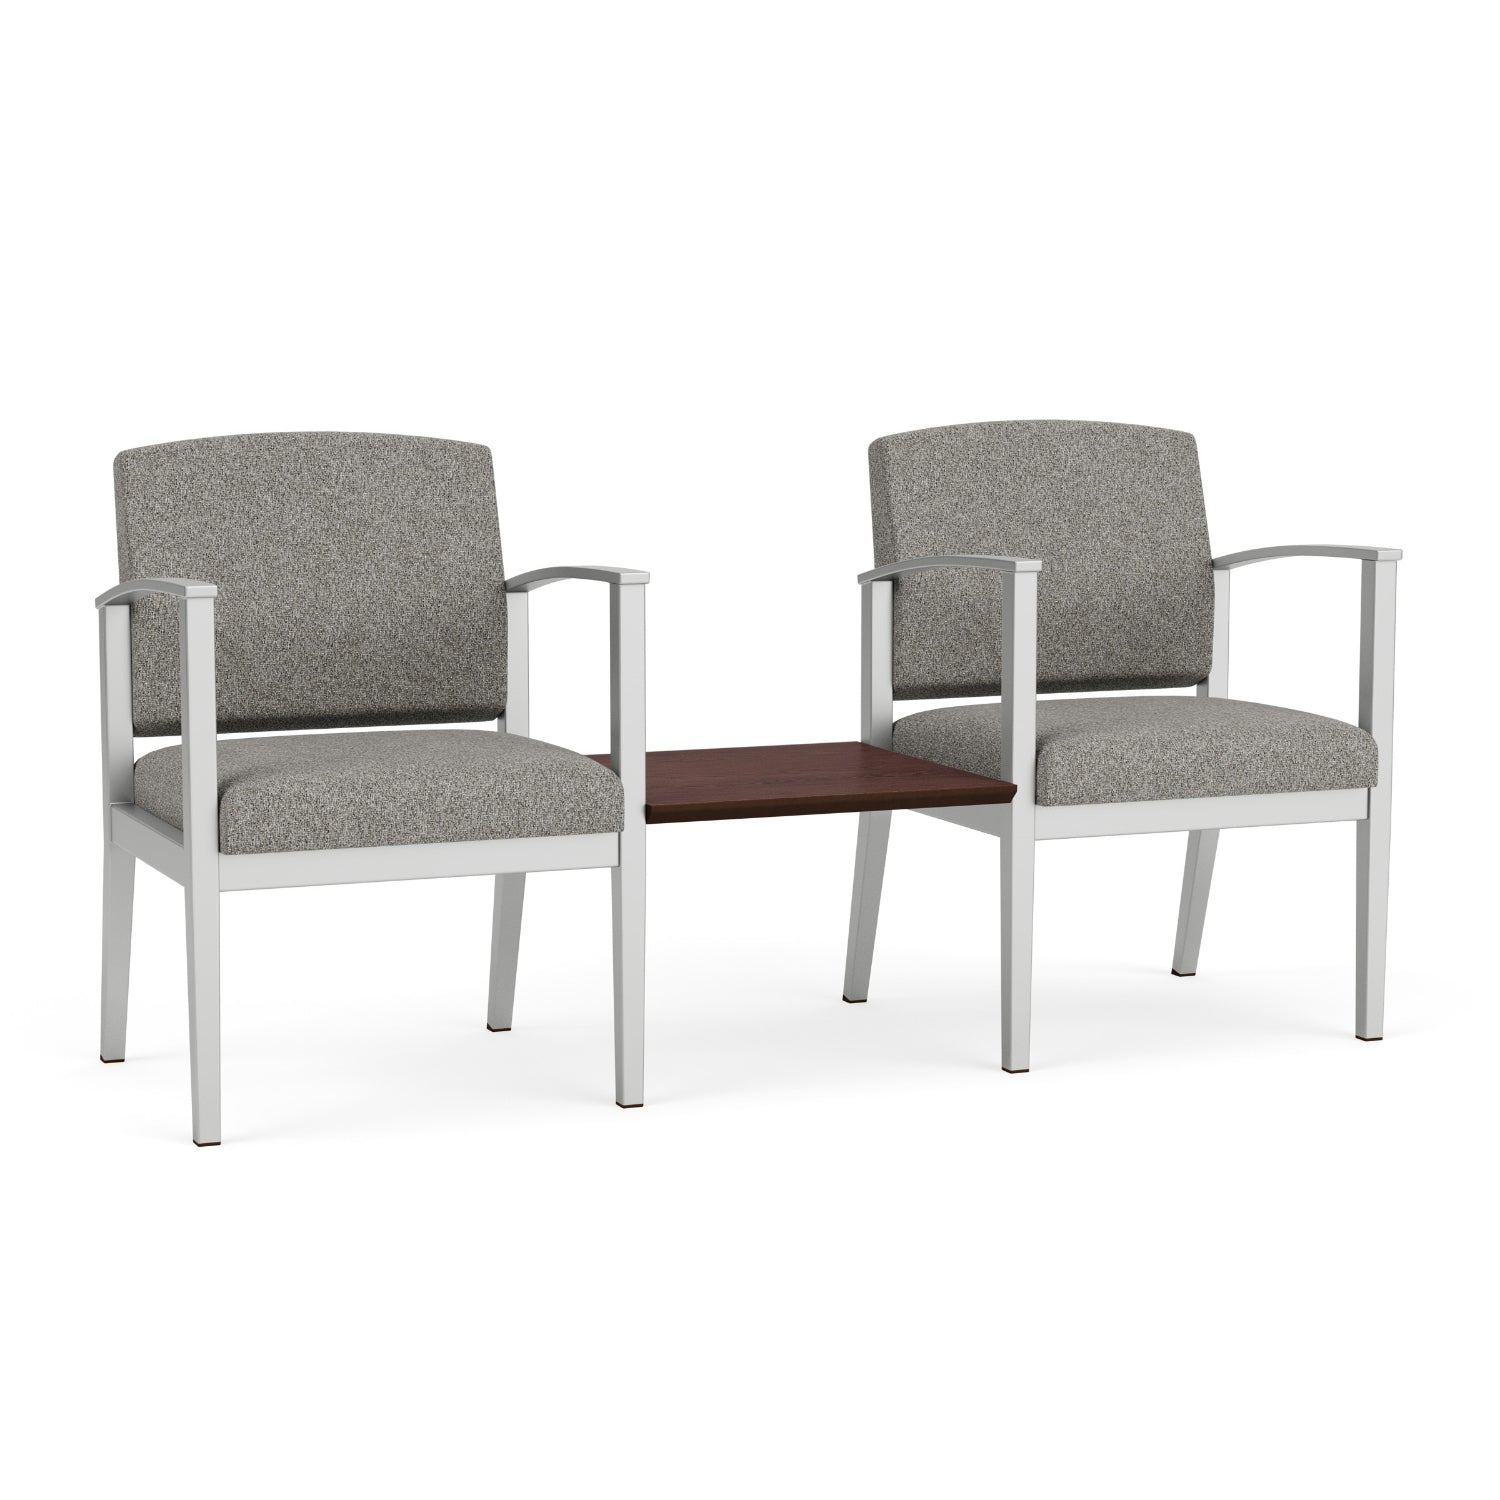 Amherst Steel Collection Reception Seating, 2 Chairs with Connecting Center Table, Standard Fabric Upholstery, FREE SHIPPING